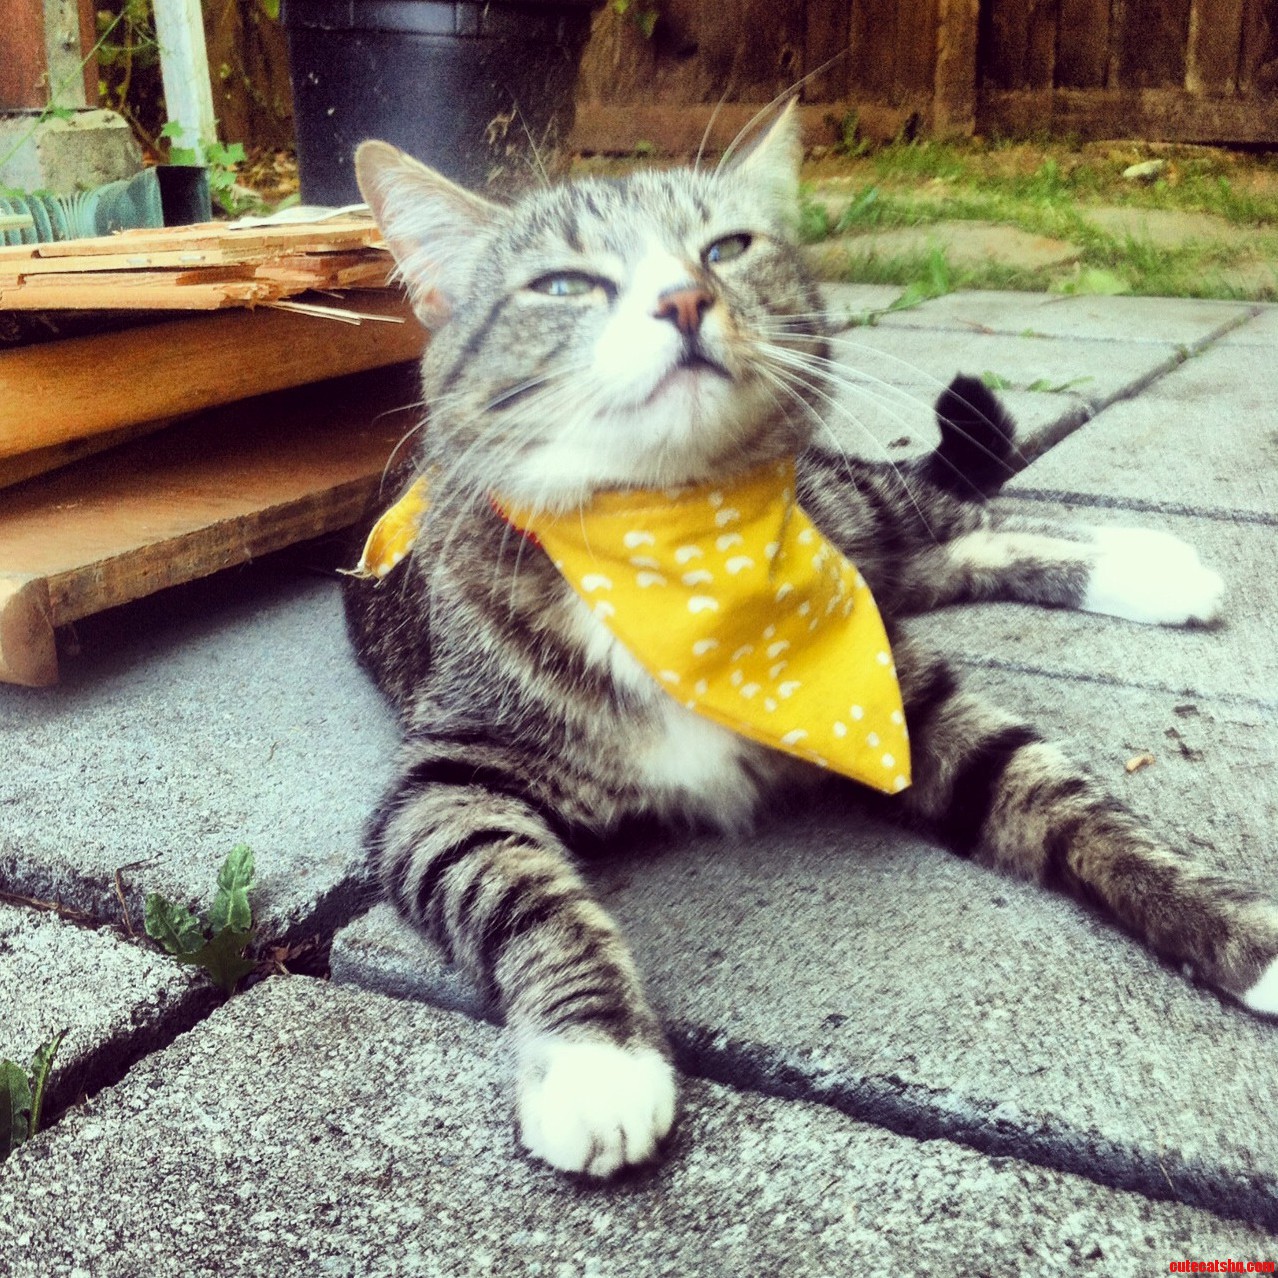 My pal is happy with the bandana i made him